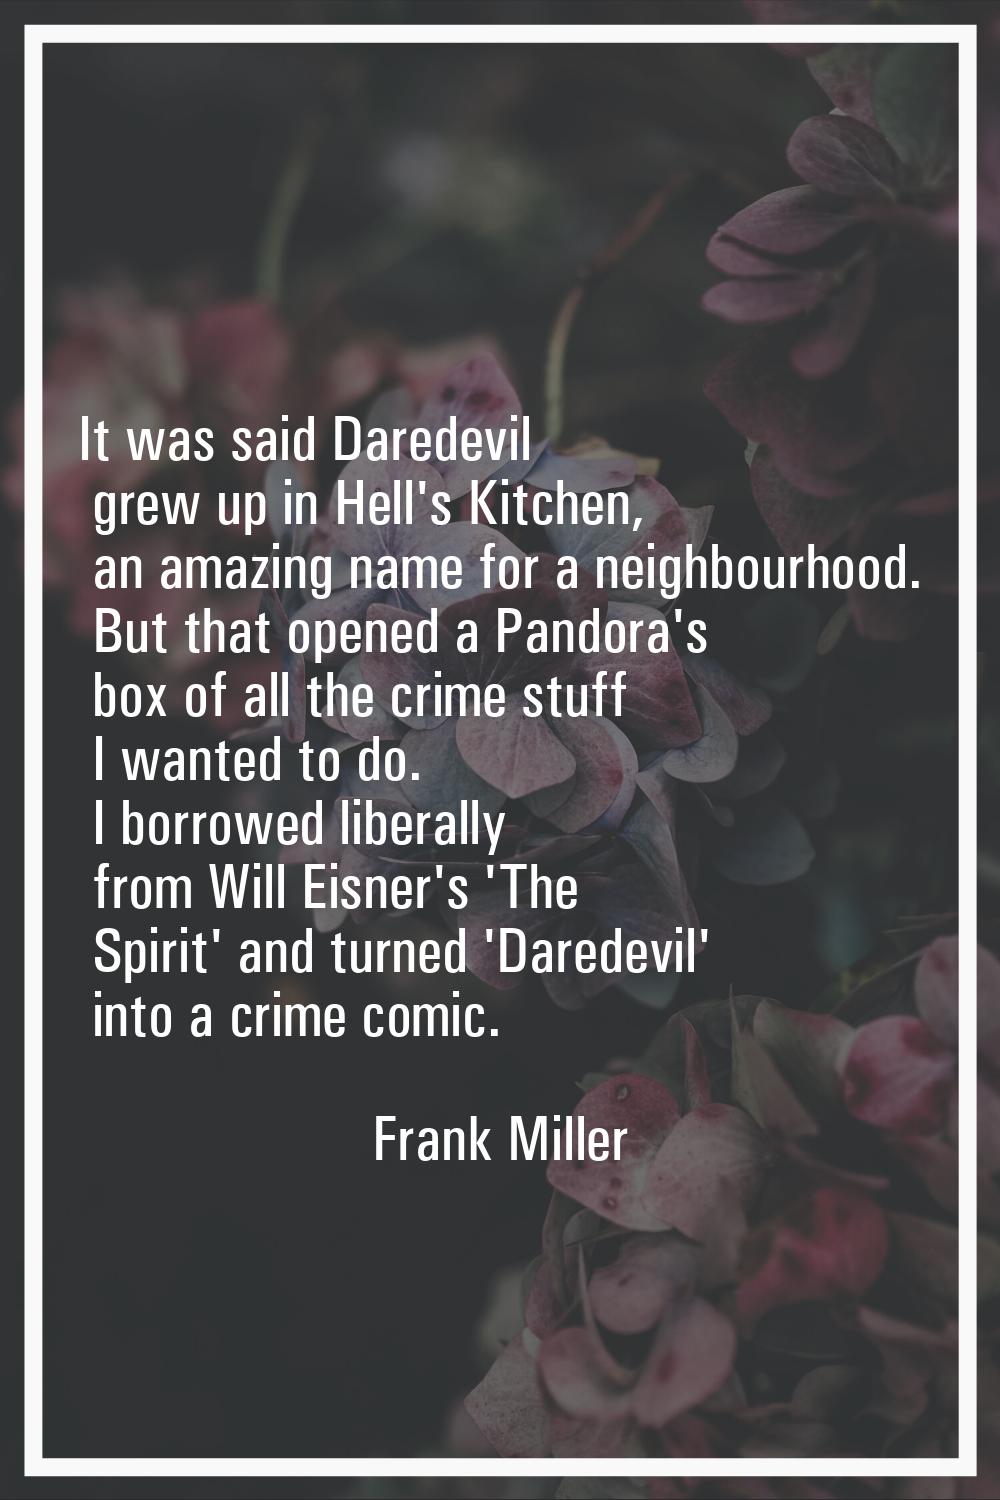 It was said Daredevil grew up in Hell's Kitchen, an amazing name for a neighbourhood. But that open